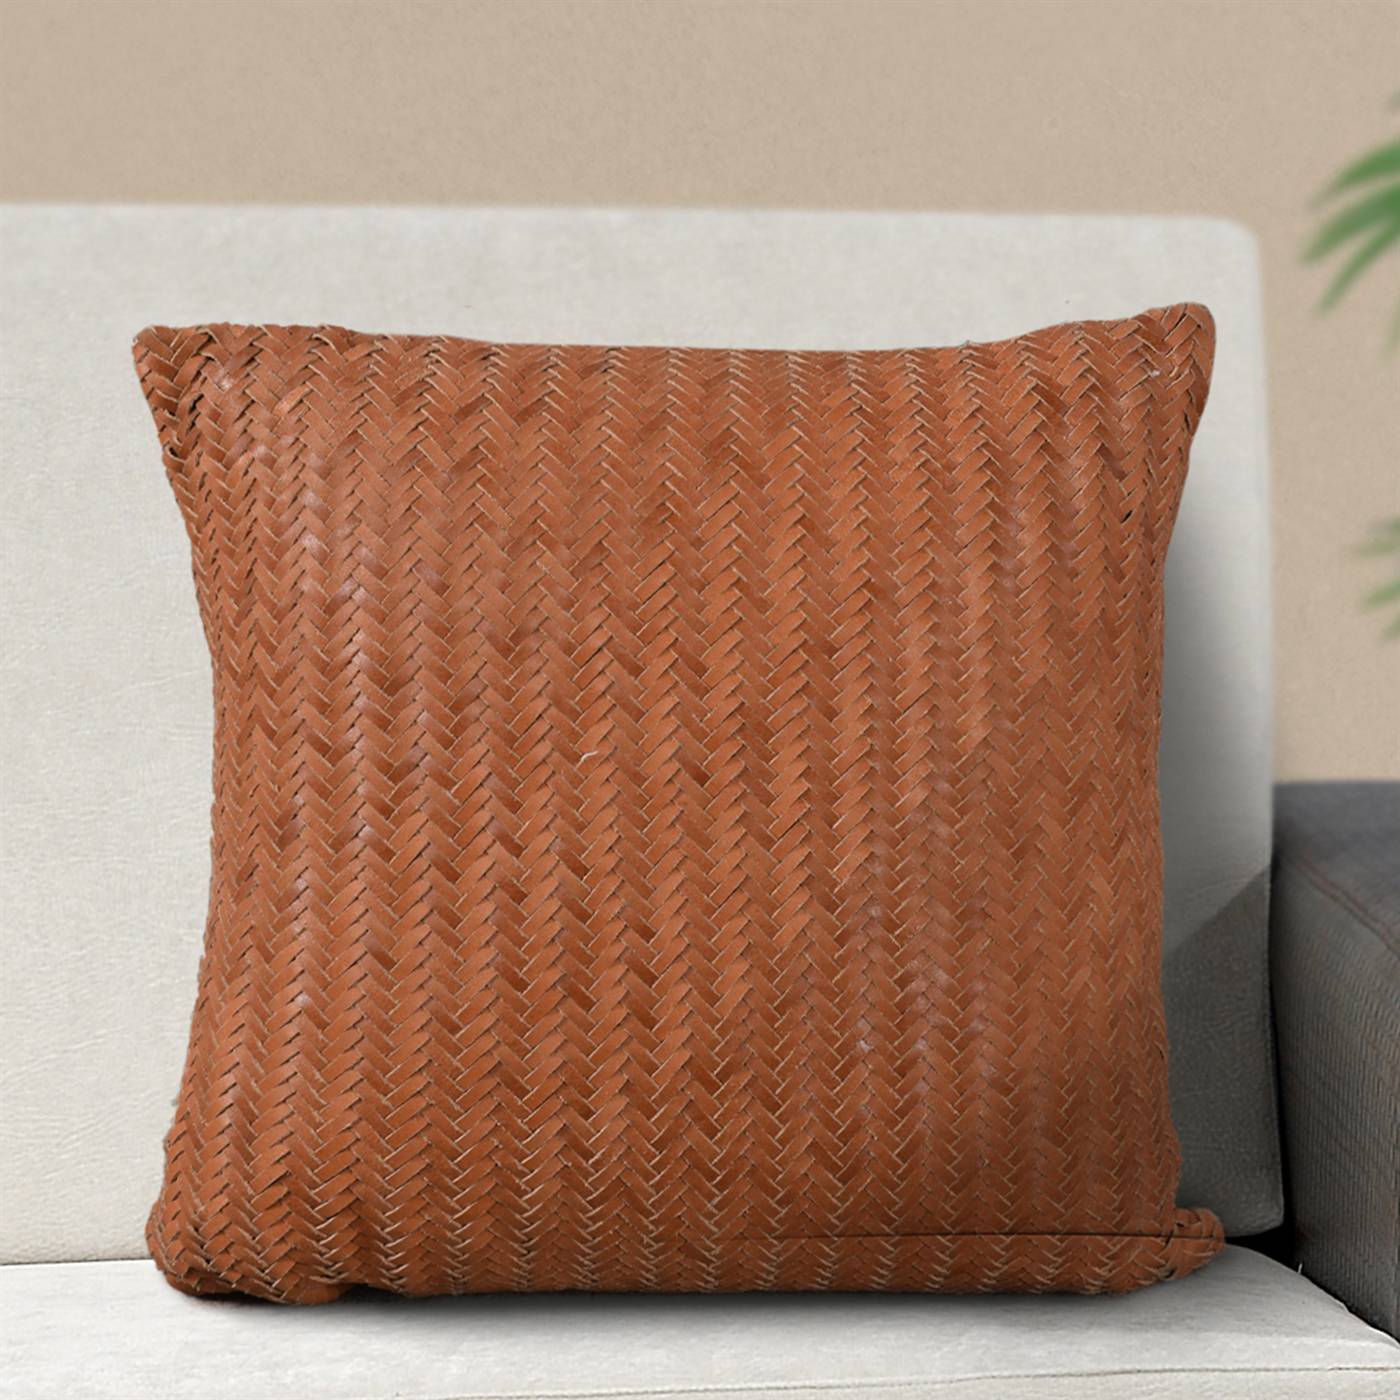 Marche Cushion, 45x45 cm, Tan, Italian Leather, Hand Made, Hm Stitching, Flat Weave